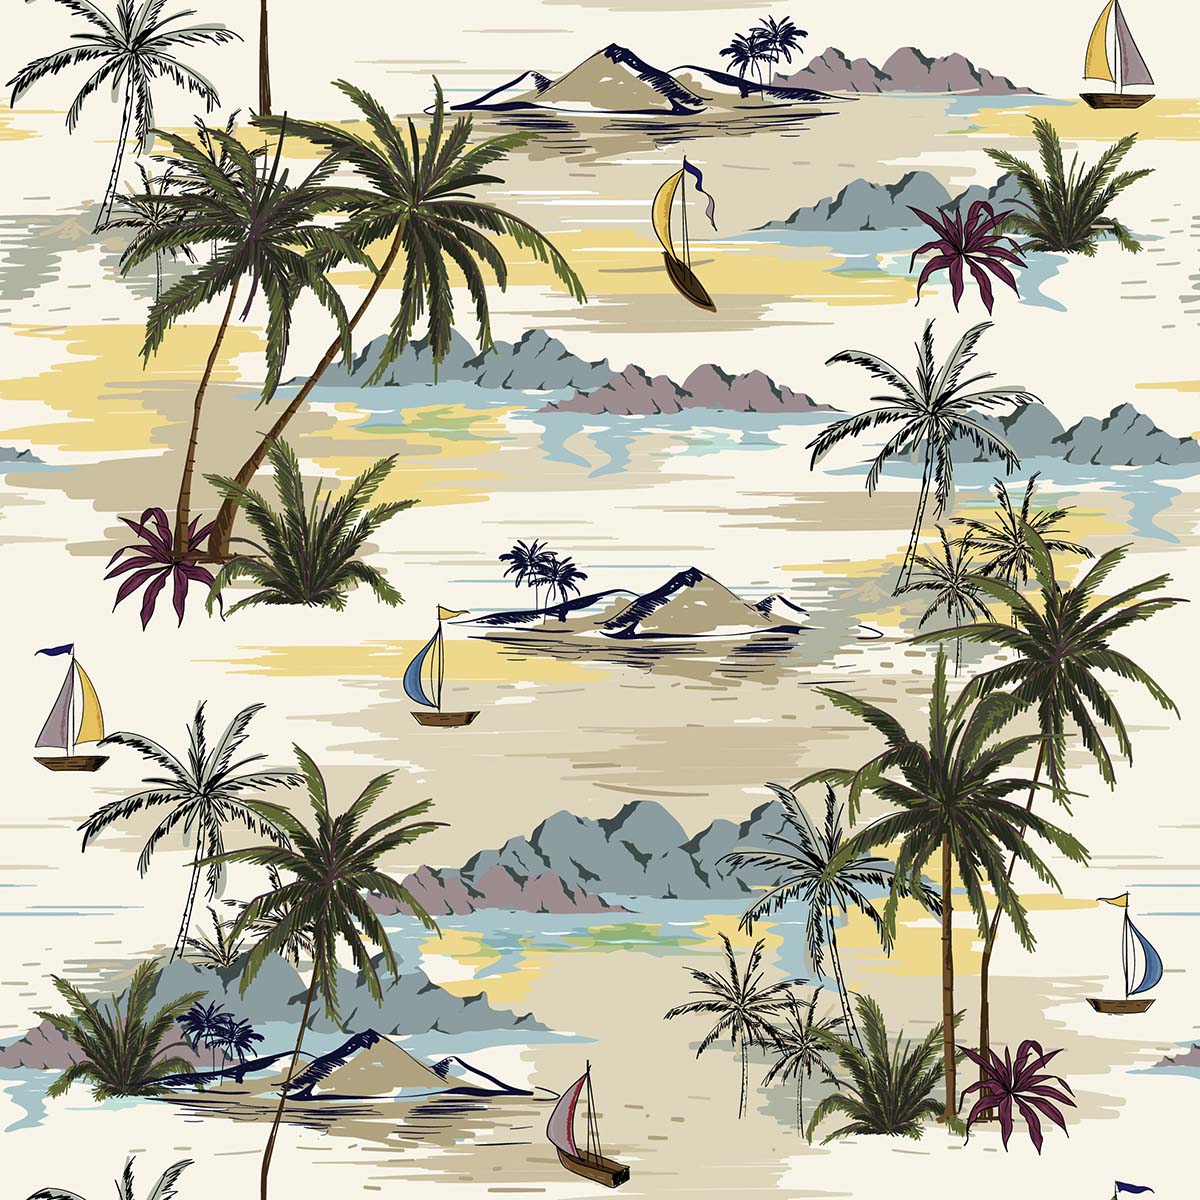 A pattern of palm trees and boats